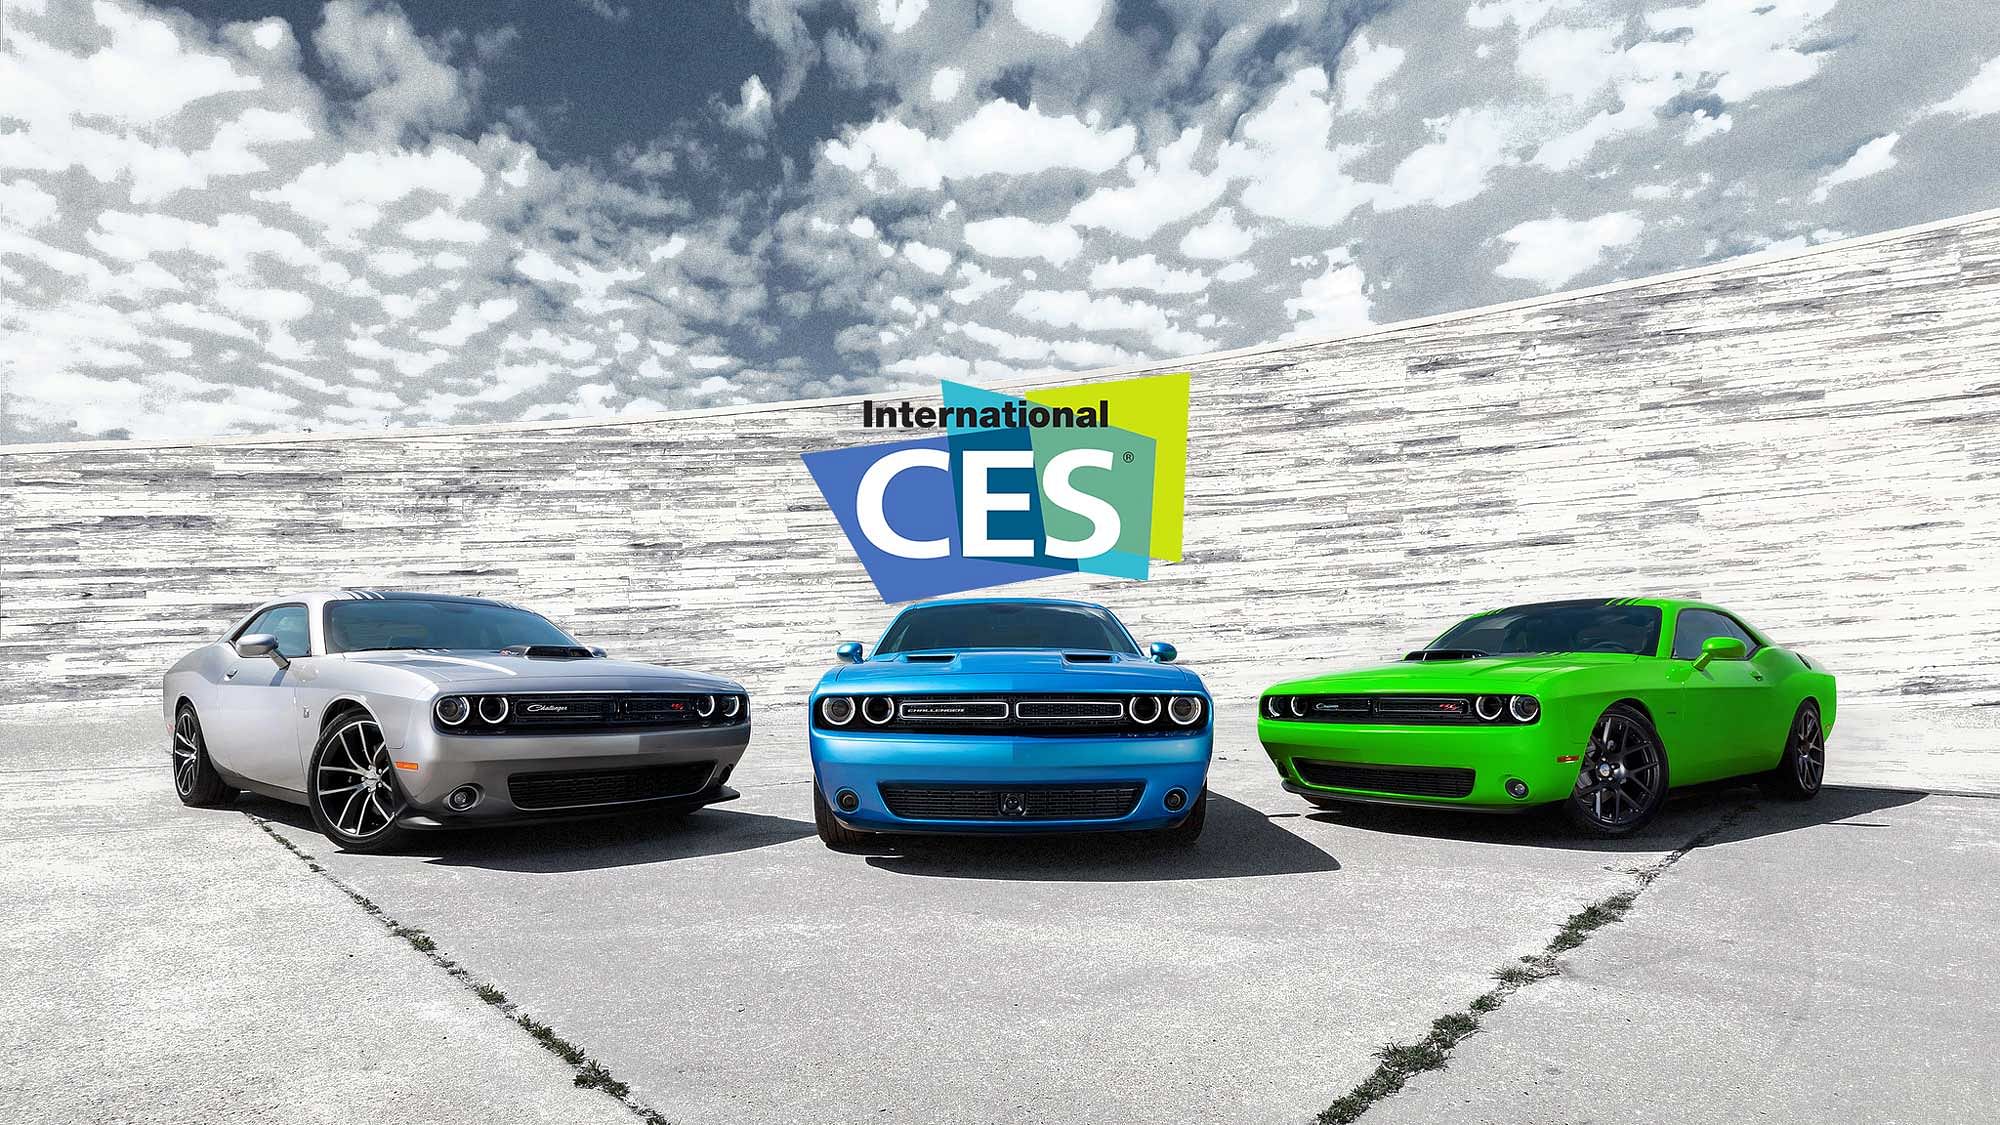 From left to right: 2015 Dodge Challenger 392 HEMI Scat Pack Shaker, 2015 Dodge Challenger SXT, 2015 Dodge Challenger R. (Photo: <a href="https://www.flickr.com/photos/chryslergroup/13855134393/in/album-72157643965622034/">Fiat/Flickr</a>) 